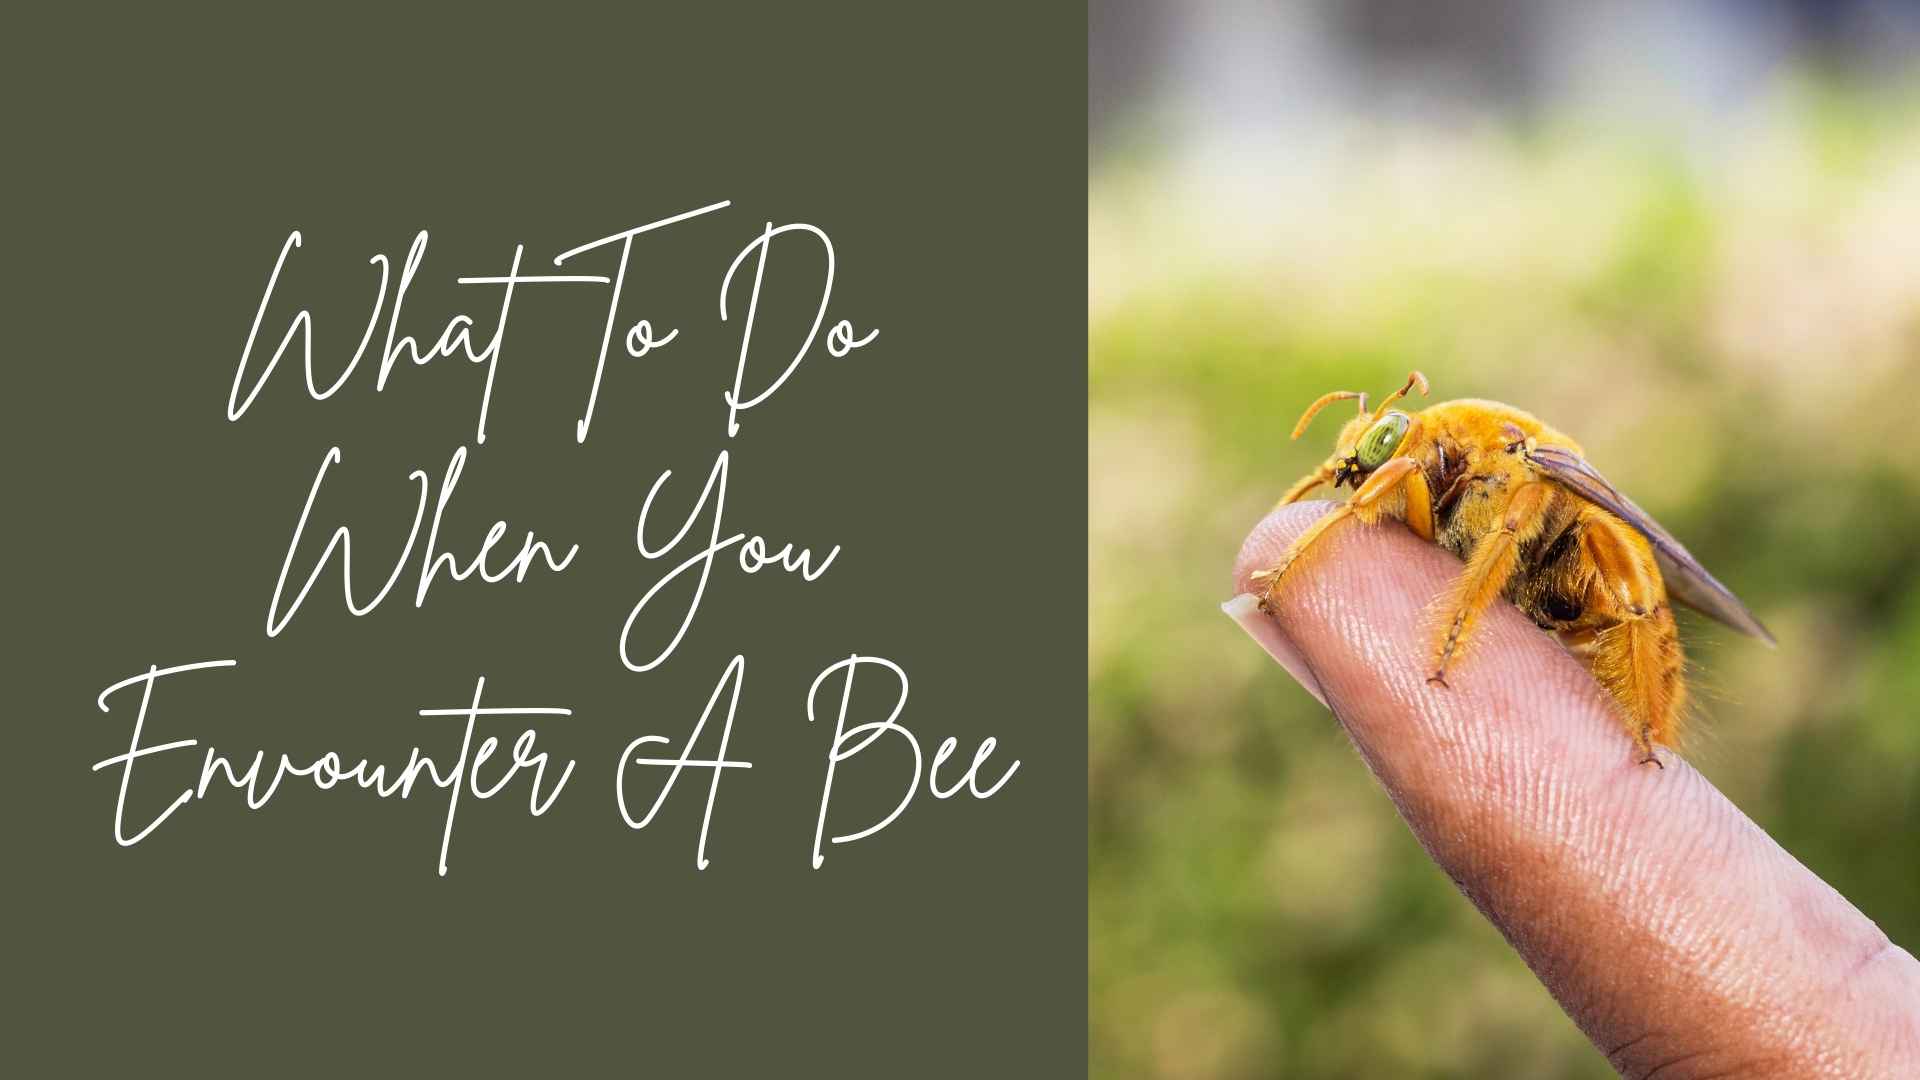 what to do when you encounter a bee